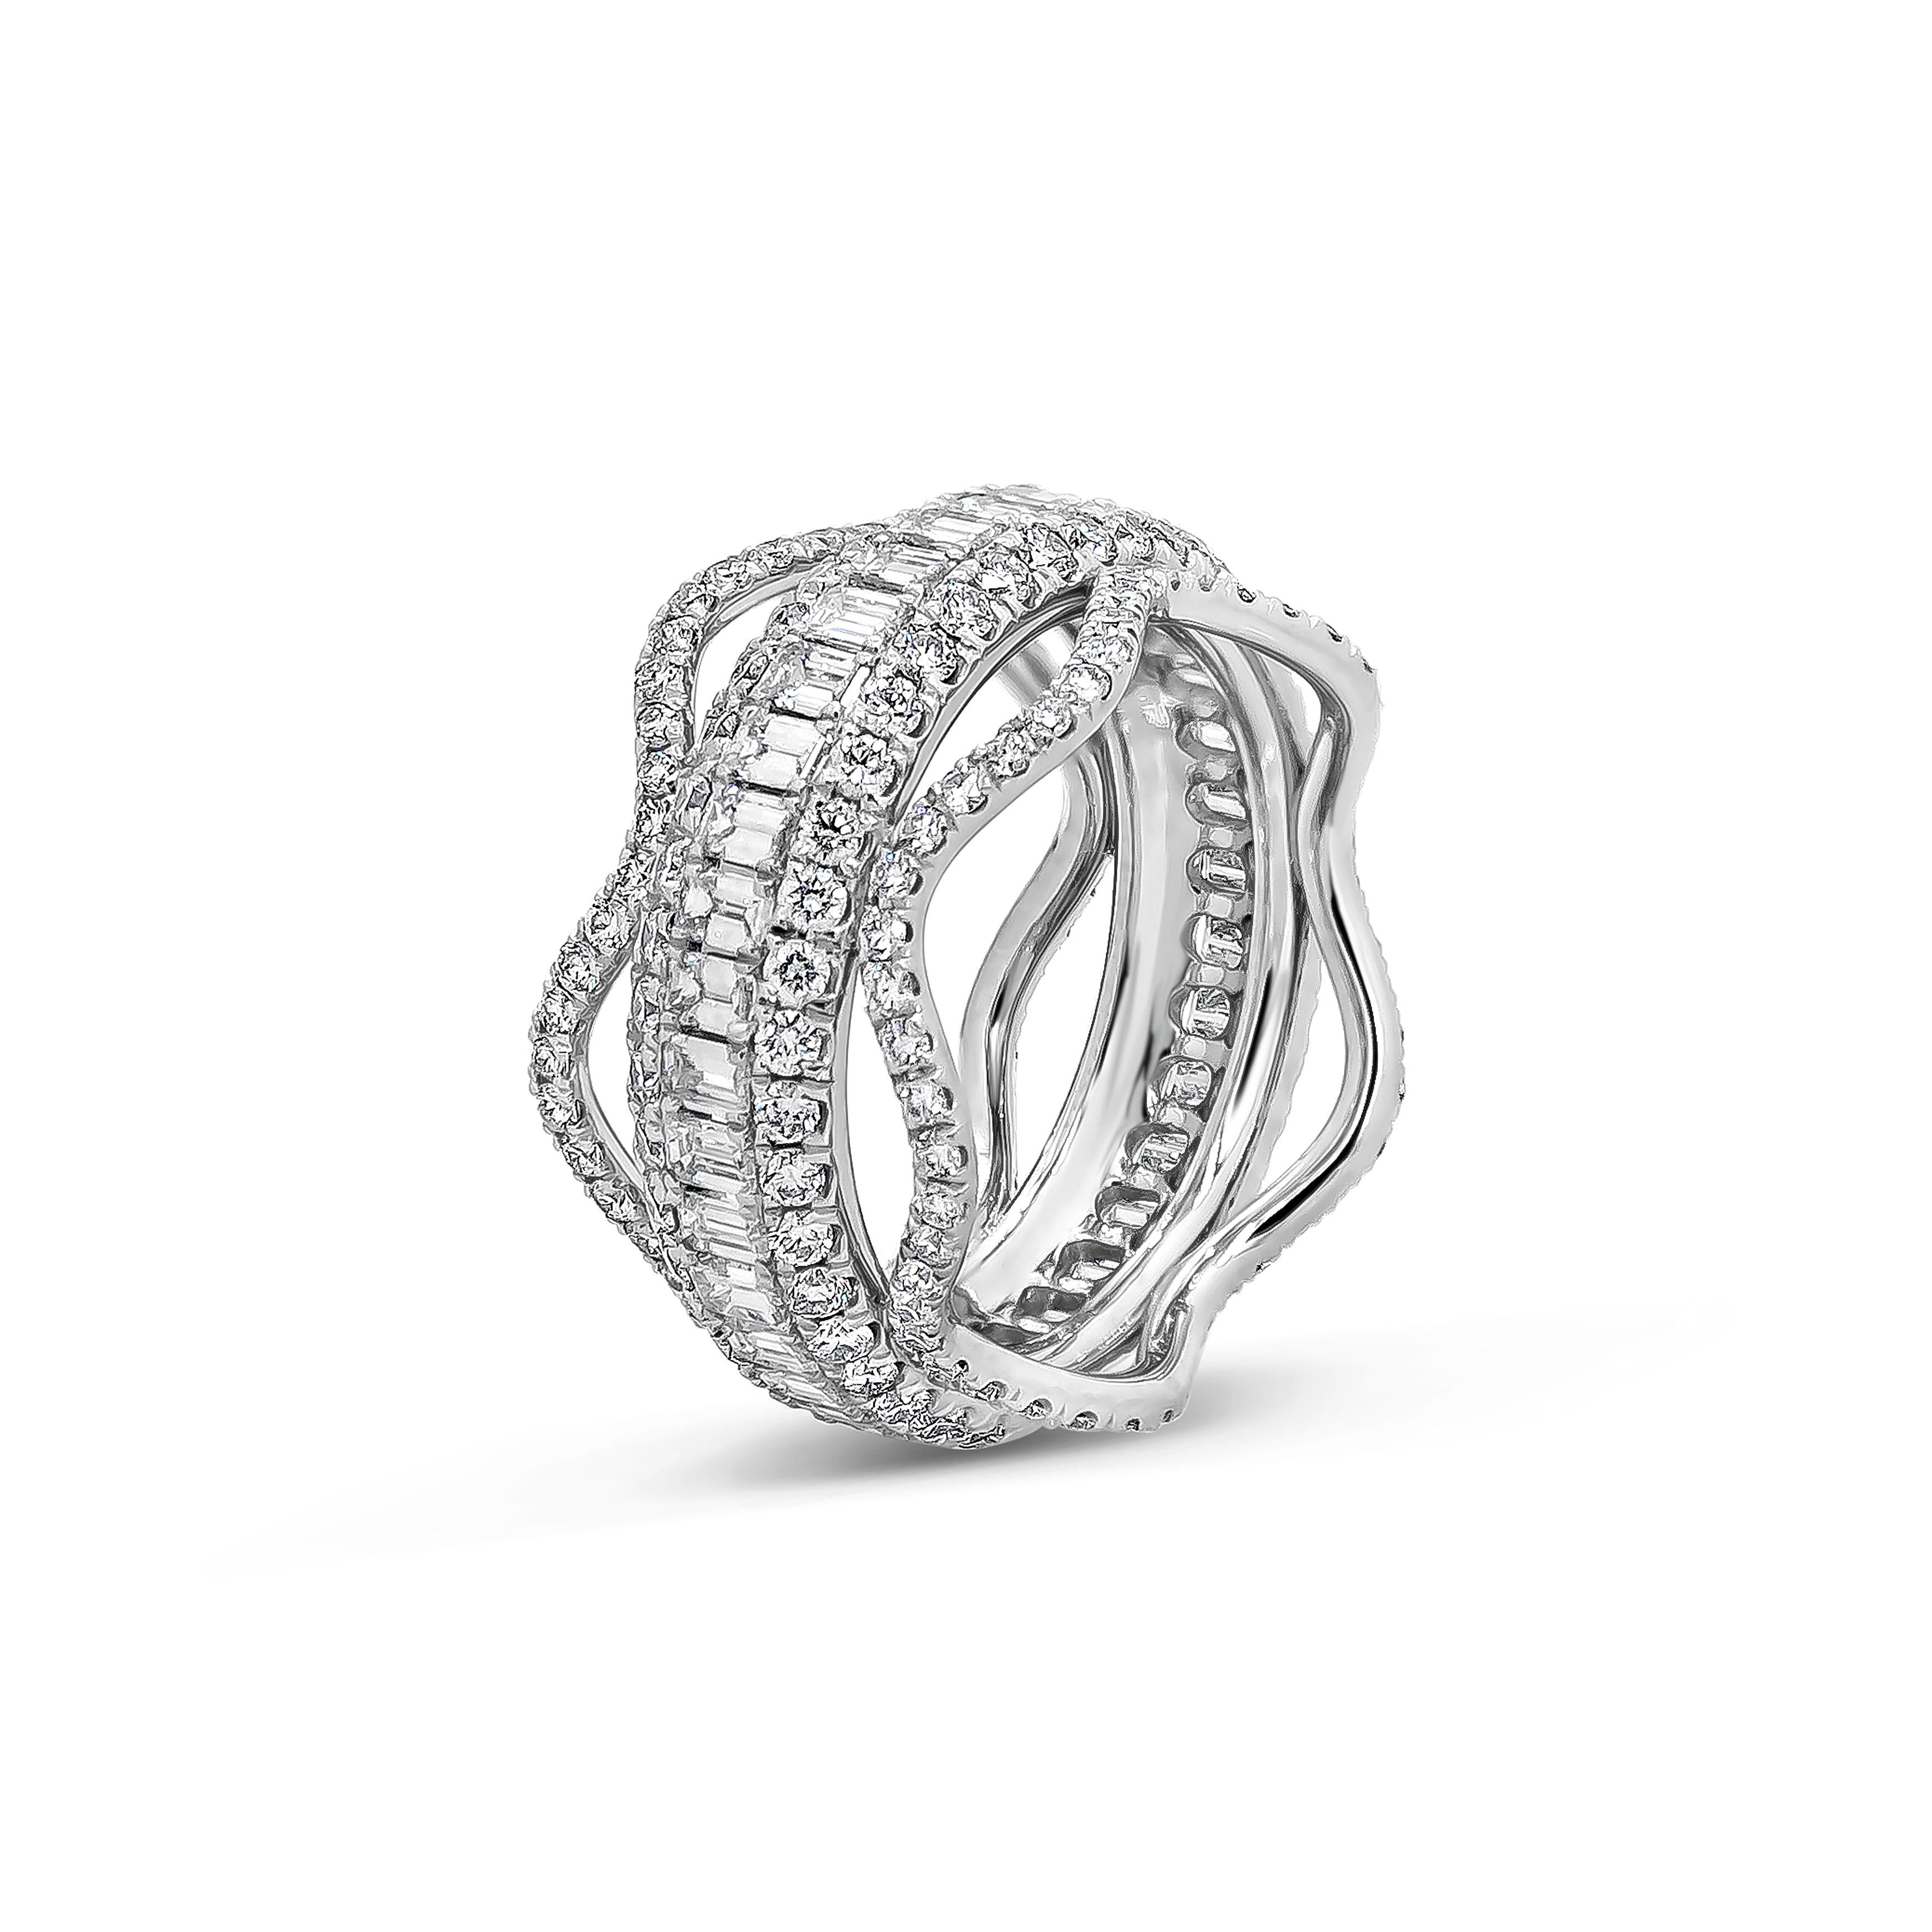 A unique and gorgeous piece showcasing a row of emerald cut diamonds, in-between two rows of round brilliant diamonds. Each side of the ring is finished with waves of round diamonds. Diamonds weigh 3.58 carats total. Made in platinum. Size 6